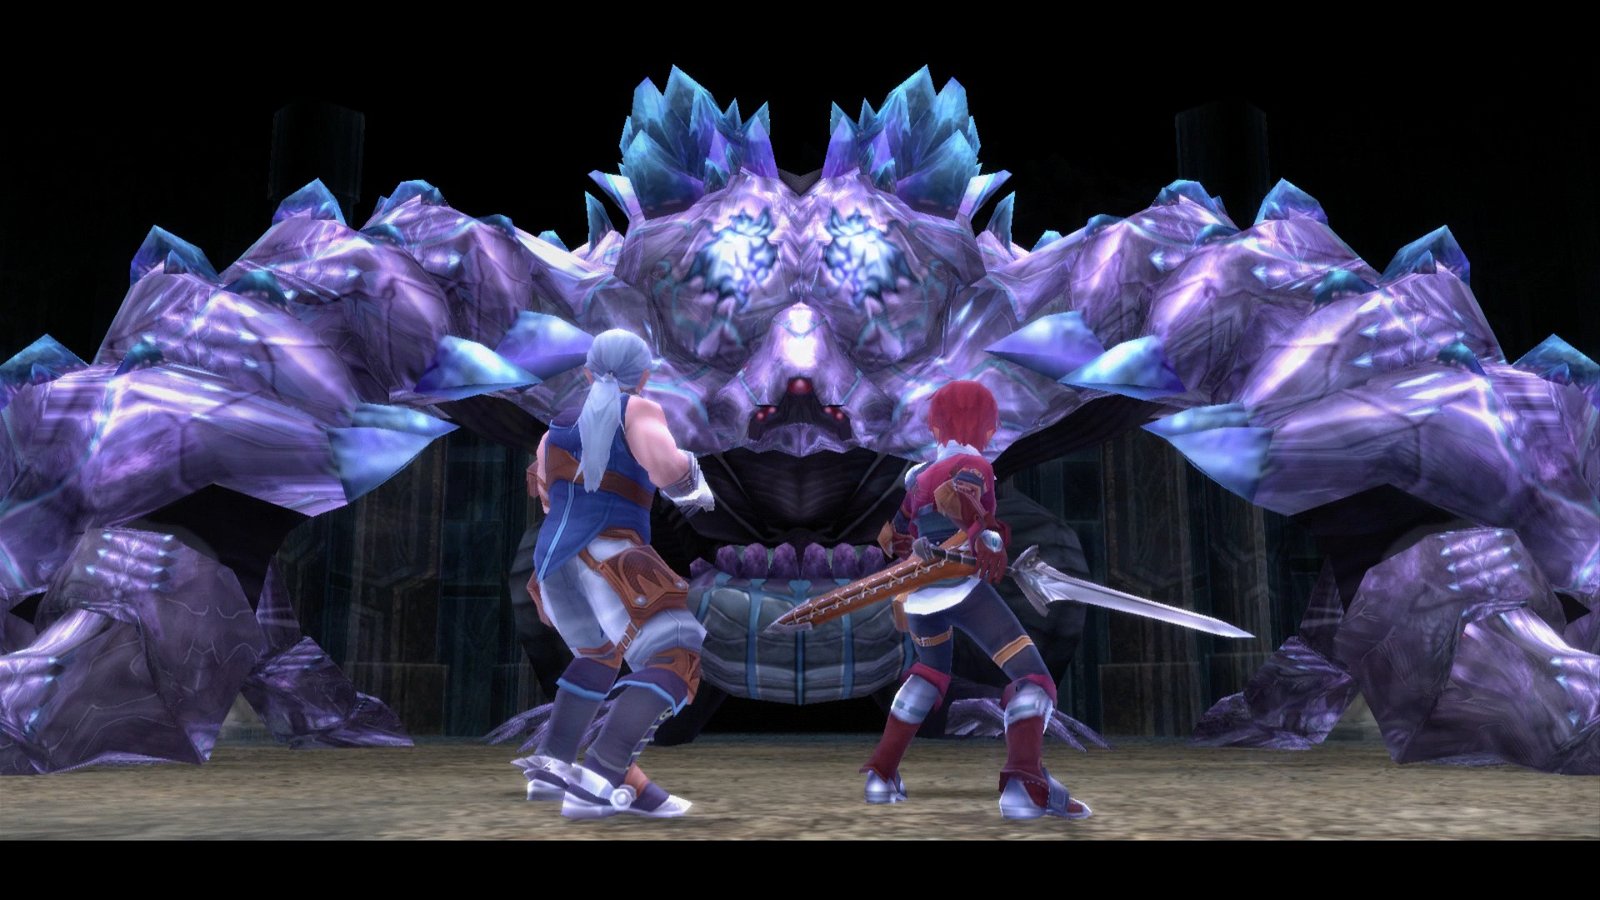 Ys Memories of Celceta Remaster, Ys: Memories of Celceta Remaster, price, gameplay, features, release date, pre-order, PS4, PlayStation 4, US, North America, Europe, EU, Xseed Games